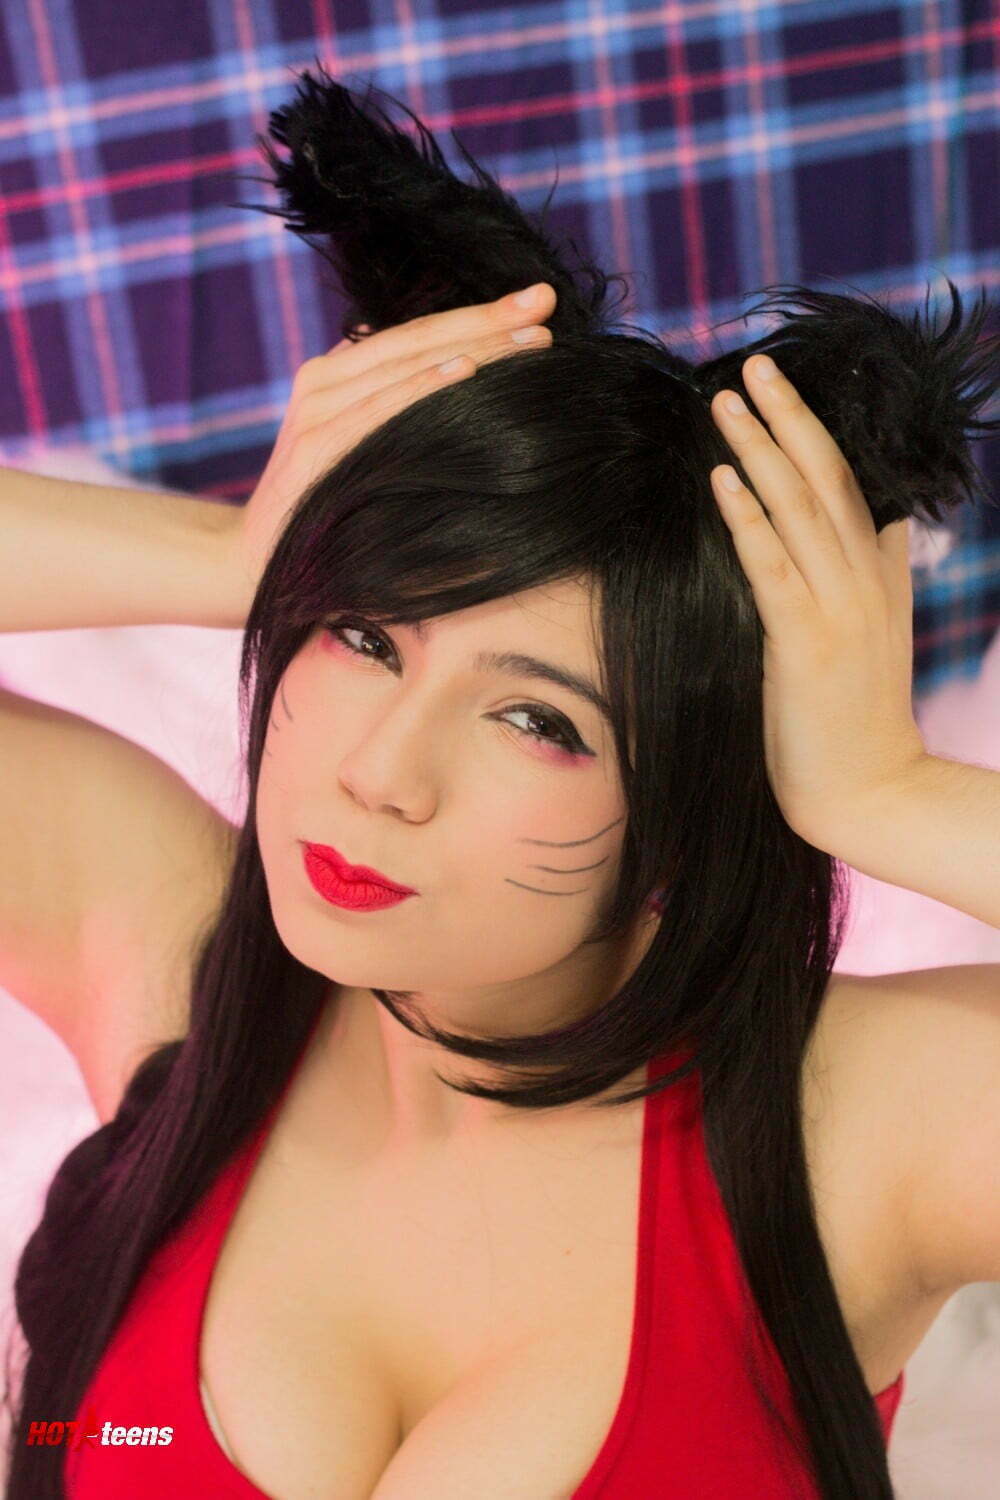 Huge Tits League - League Of Legends Ahri Naked Cosplay Big Tits Photoshoot